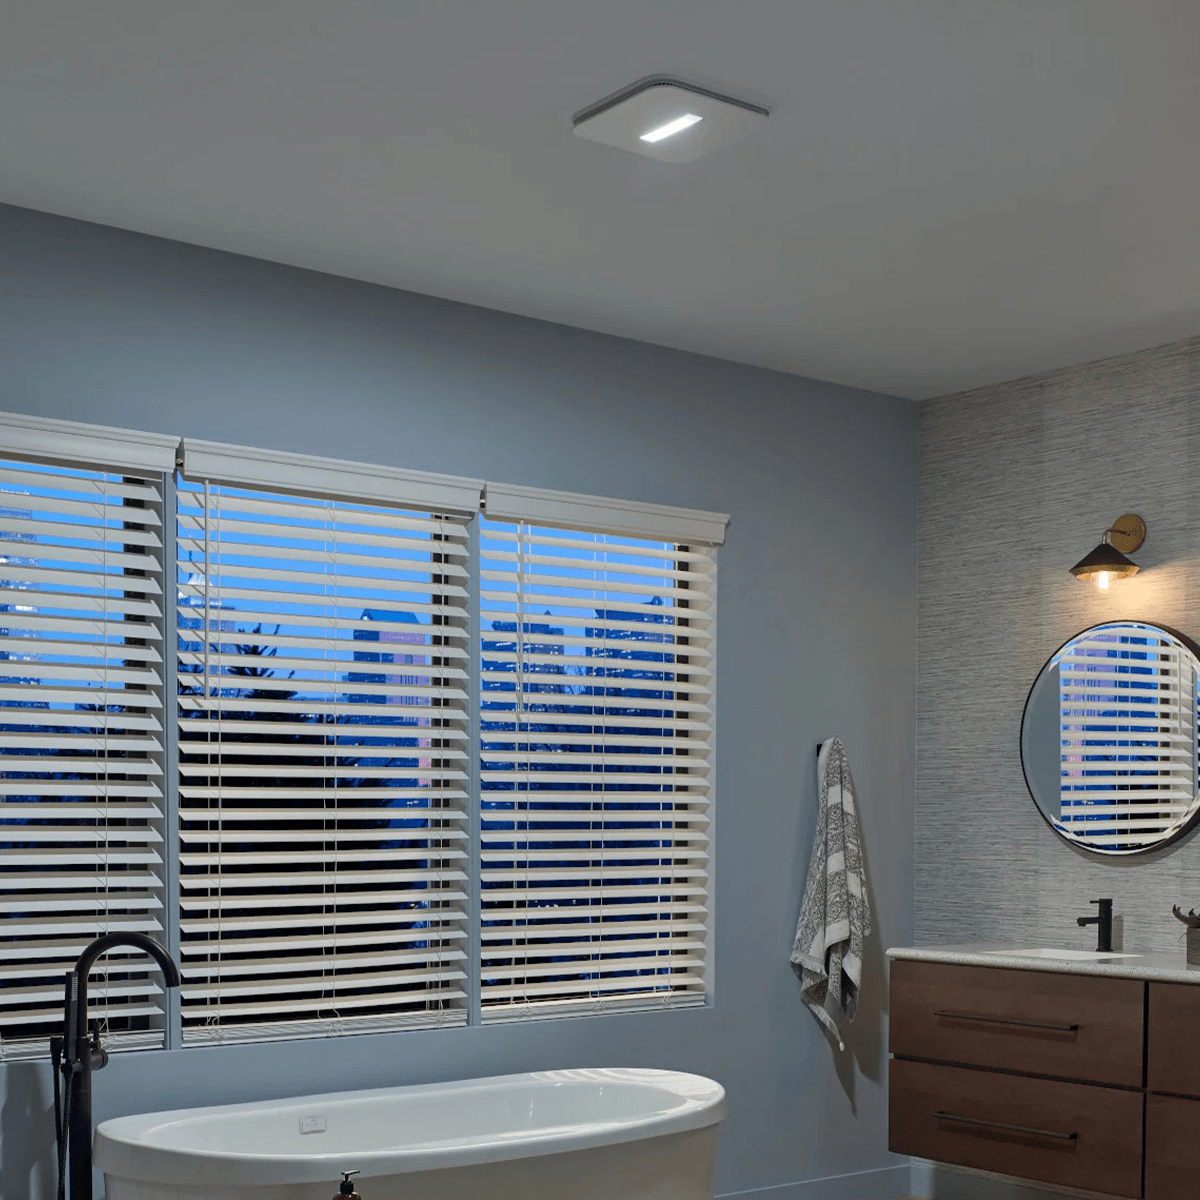 Top Rated Bathroom Exhaust Fans With Light Options For Optimum Ventilation